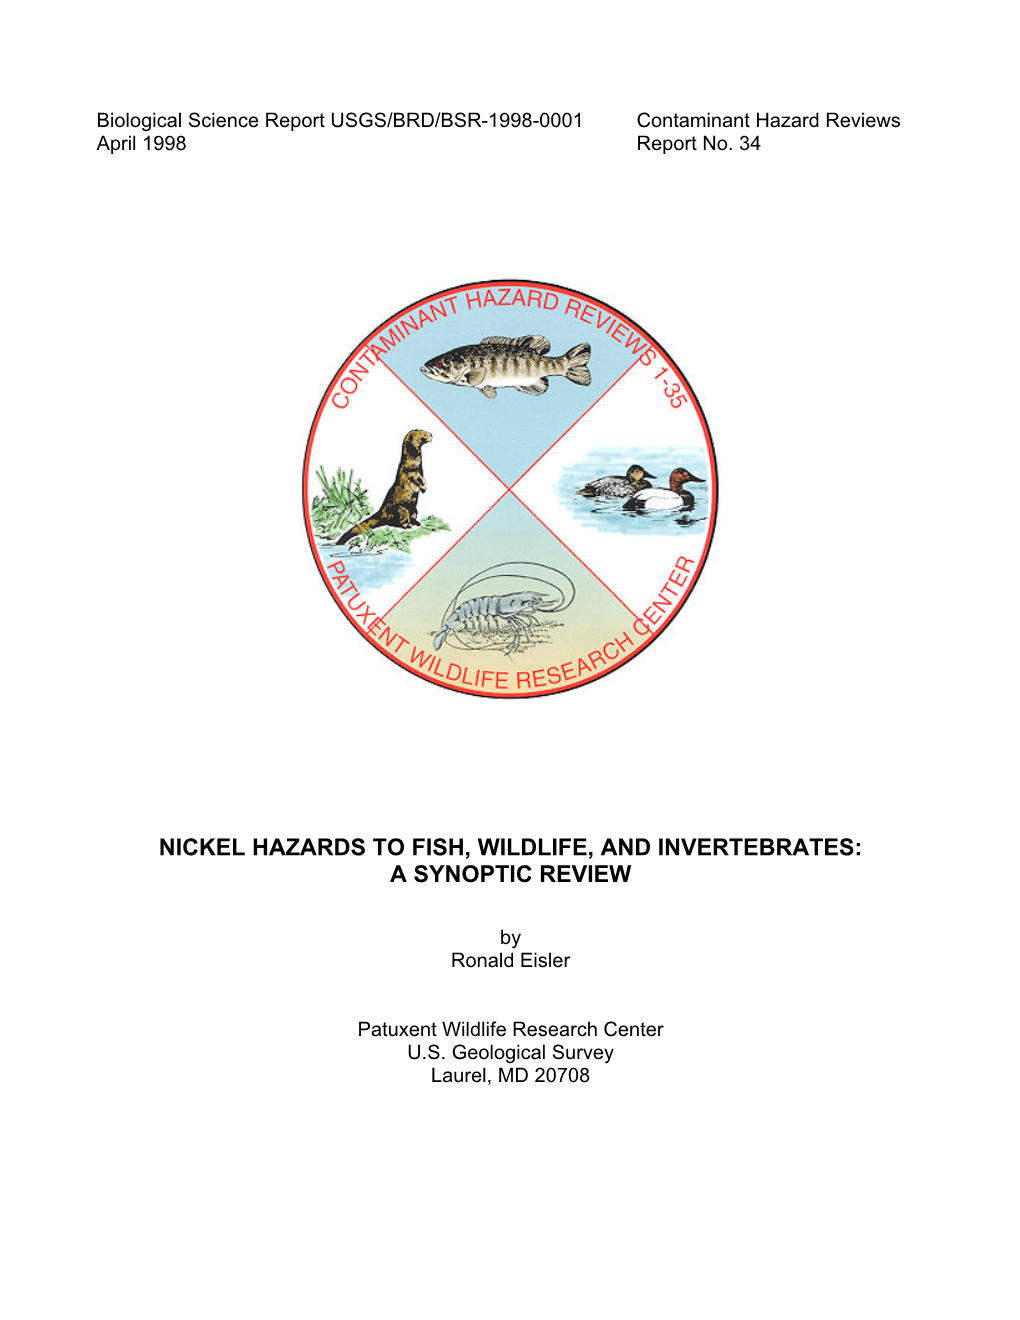 Nickel Hazards to Fish, Wildlife, and Invertebrates: a Synoptic Review